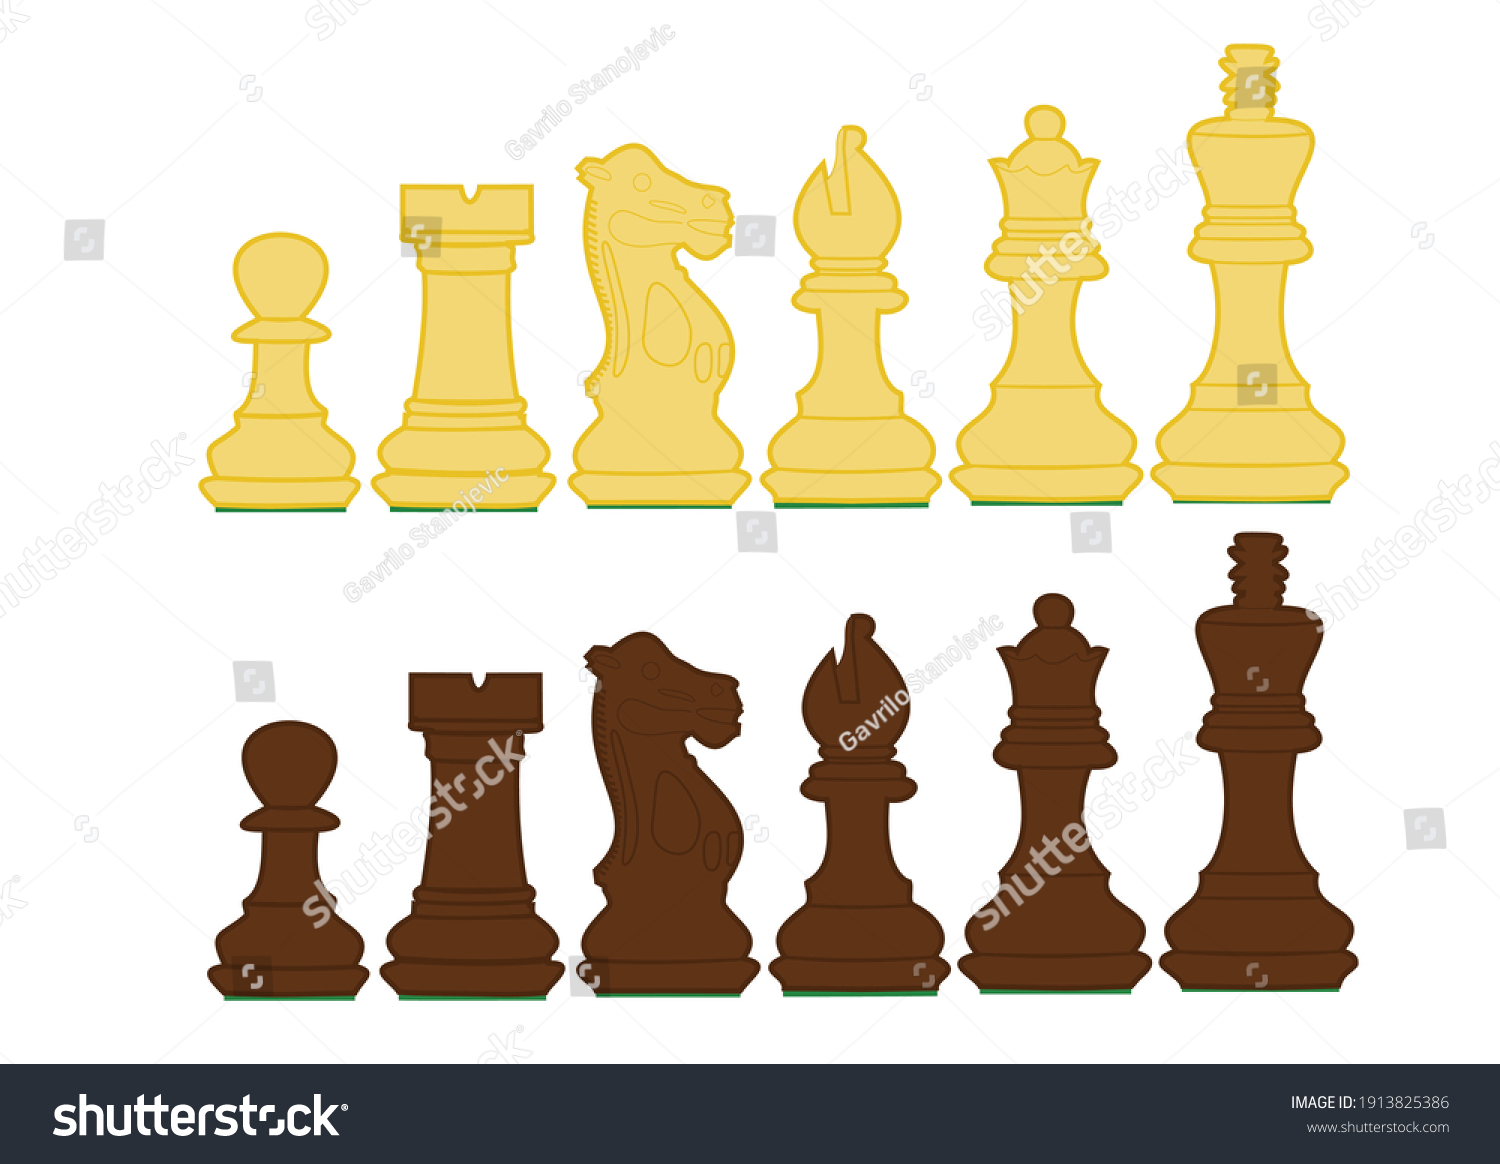 SVG of all black and white chess pieces arranged in size isolated on a white background svg